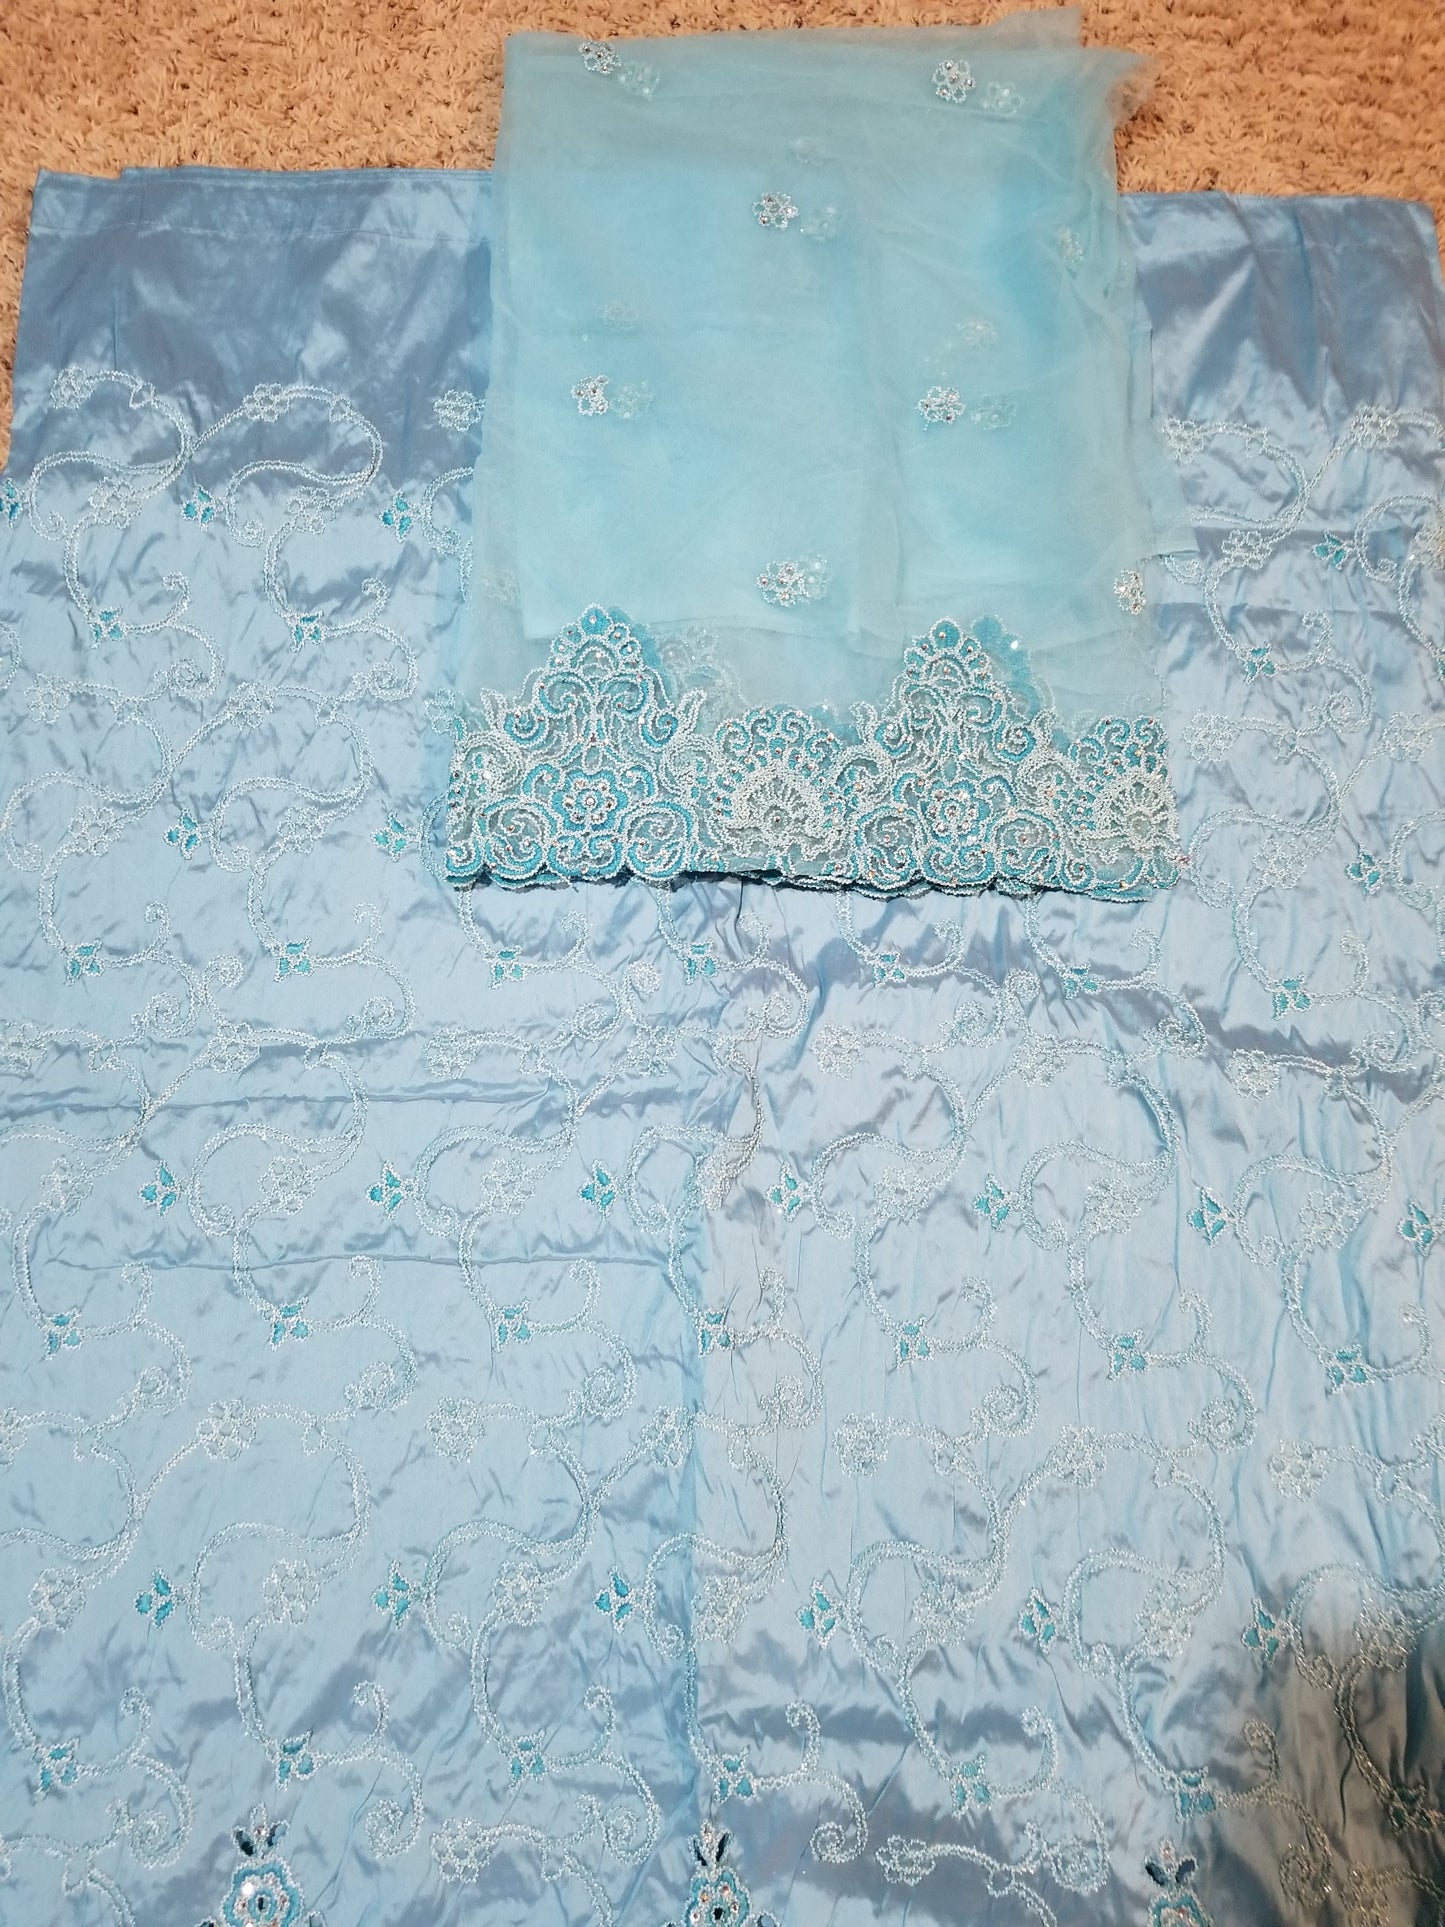 Clearance sale: sky blue Embriodered Taffeta silk George wrapper 5yds  + 1.8yds. Matching net blouse fabric. Small-George Sold as a set. All over embriodery + border hand cut